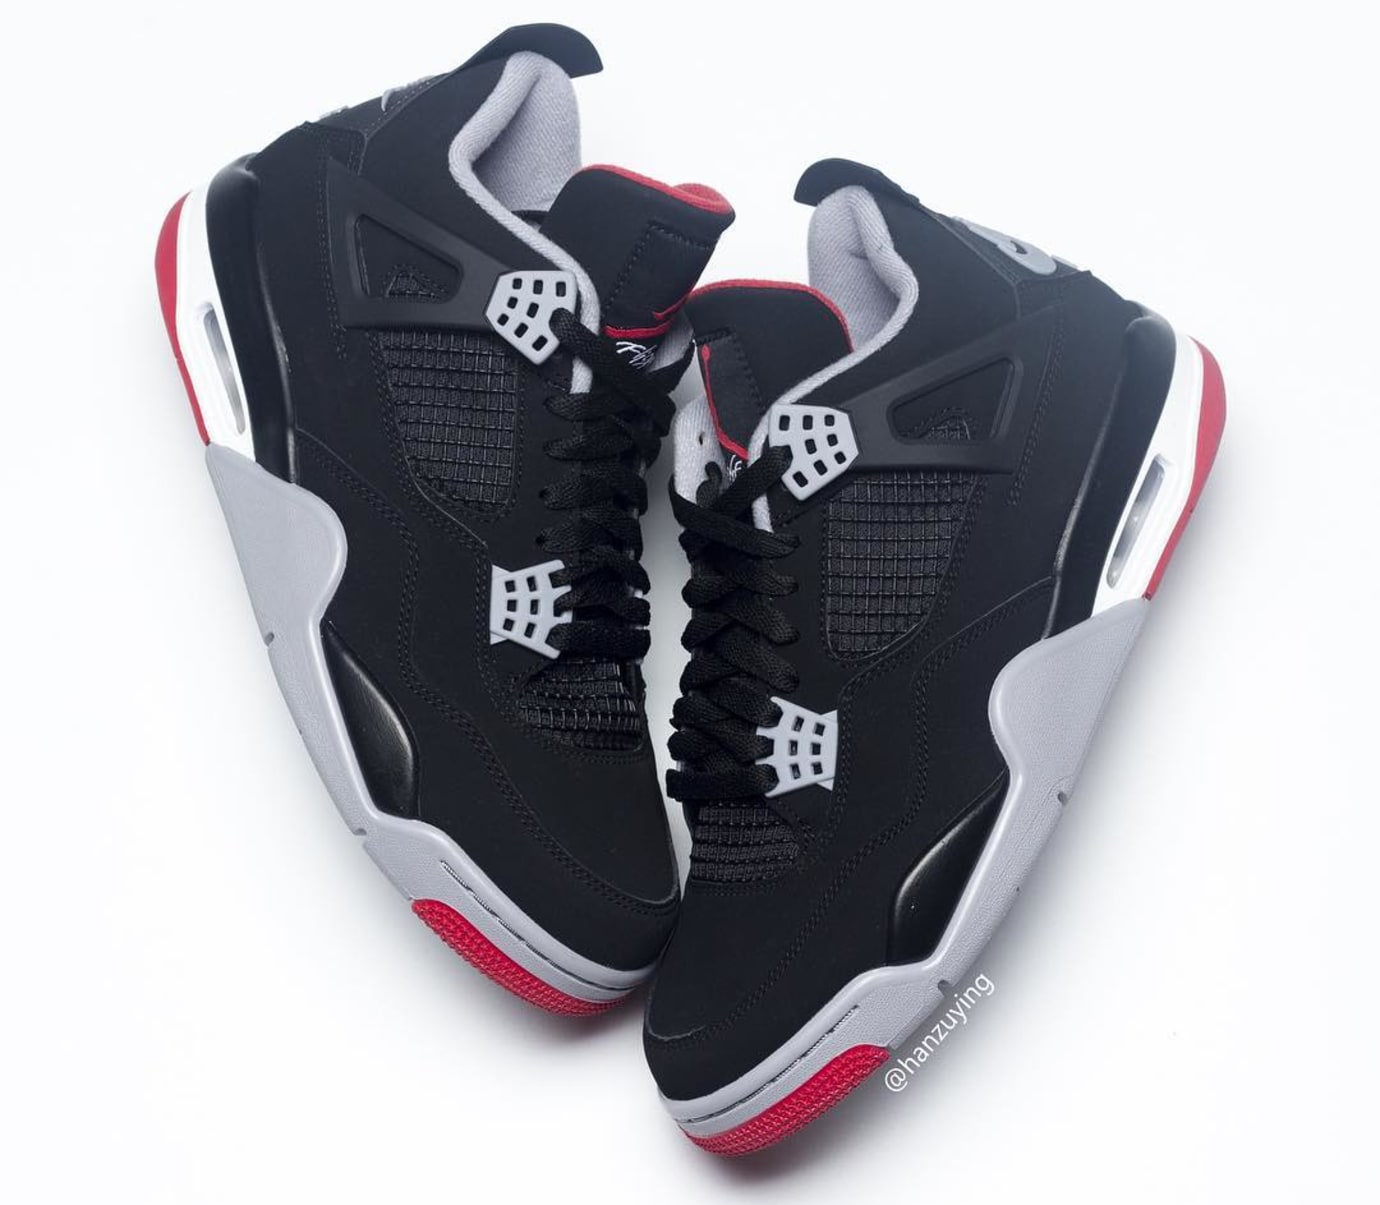 The Air Jordan 4 Bred unveils itself in 